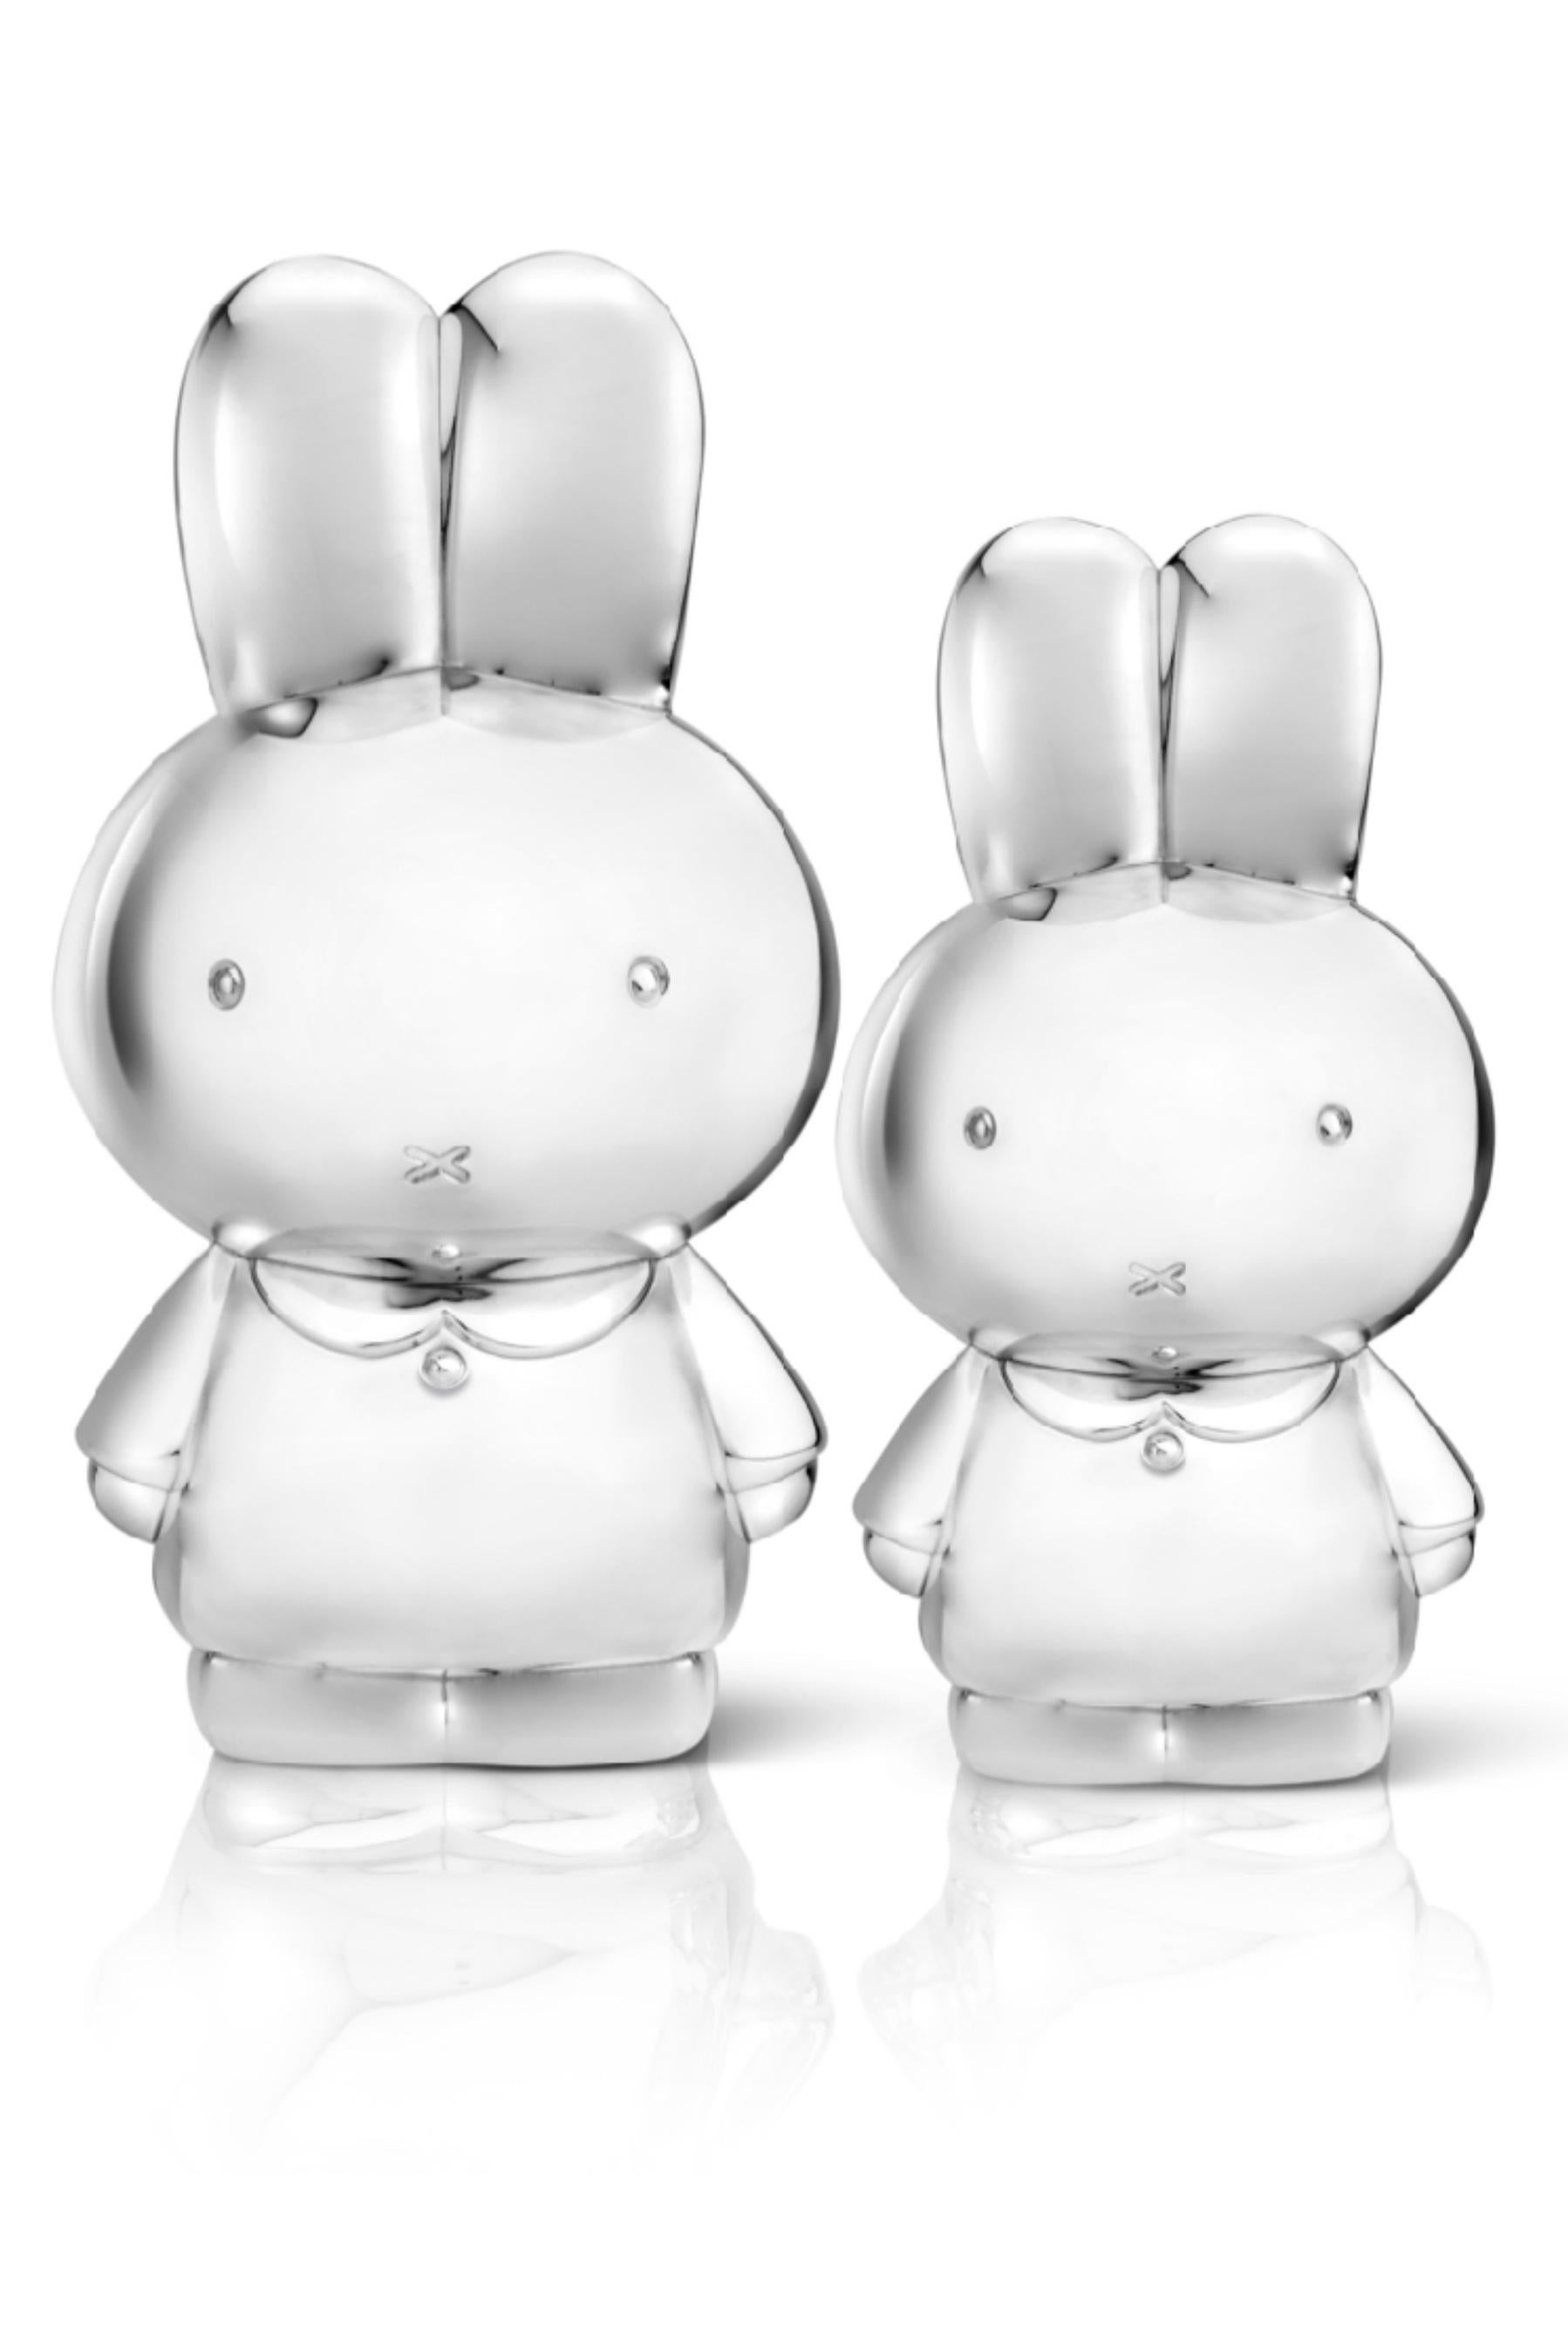 Metal Miffy Silver Plated Money Bank by Dutch Illustrator and Writer Dick Bruna, 1955